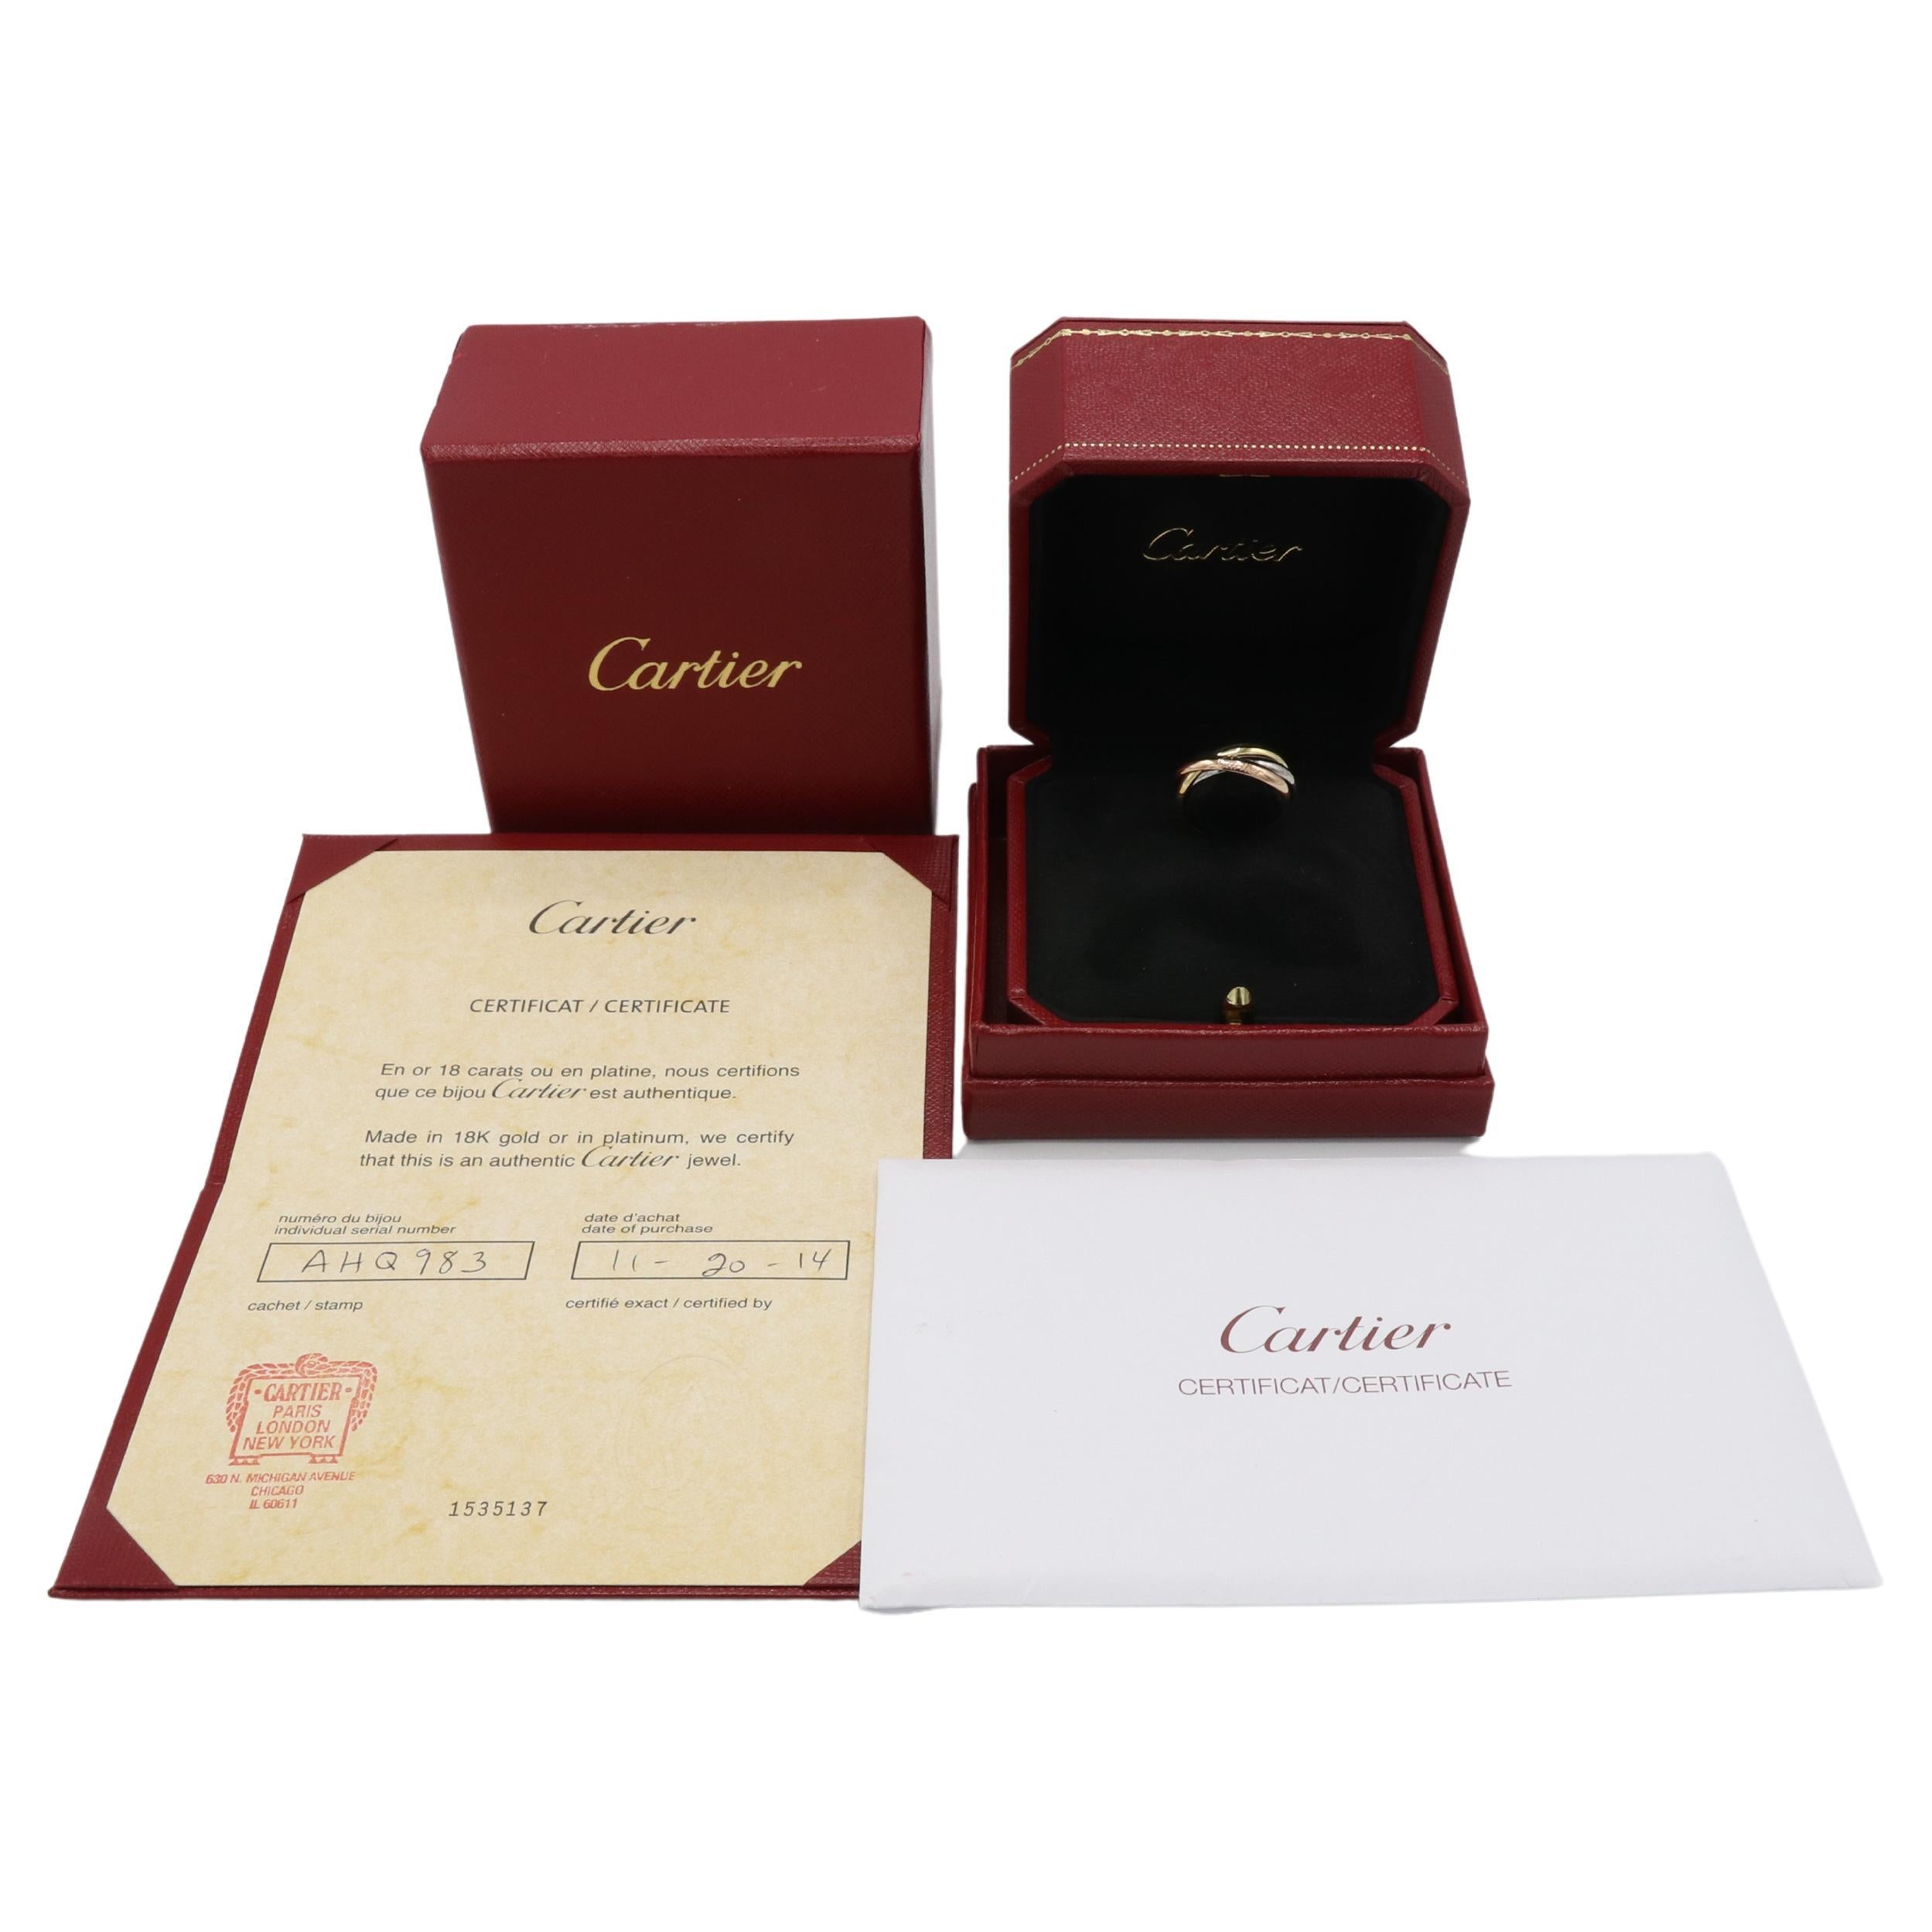 Cartier Classic Tri-Color Trinity Rolling Band Ring Box & Papers
Metal: Rose, yellow white 18k gold
Weight: 5.34 grams
Size: 54 (6.75)
Retail: $1,960 USD
Note: Box & Papers
